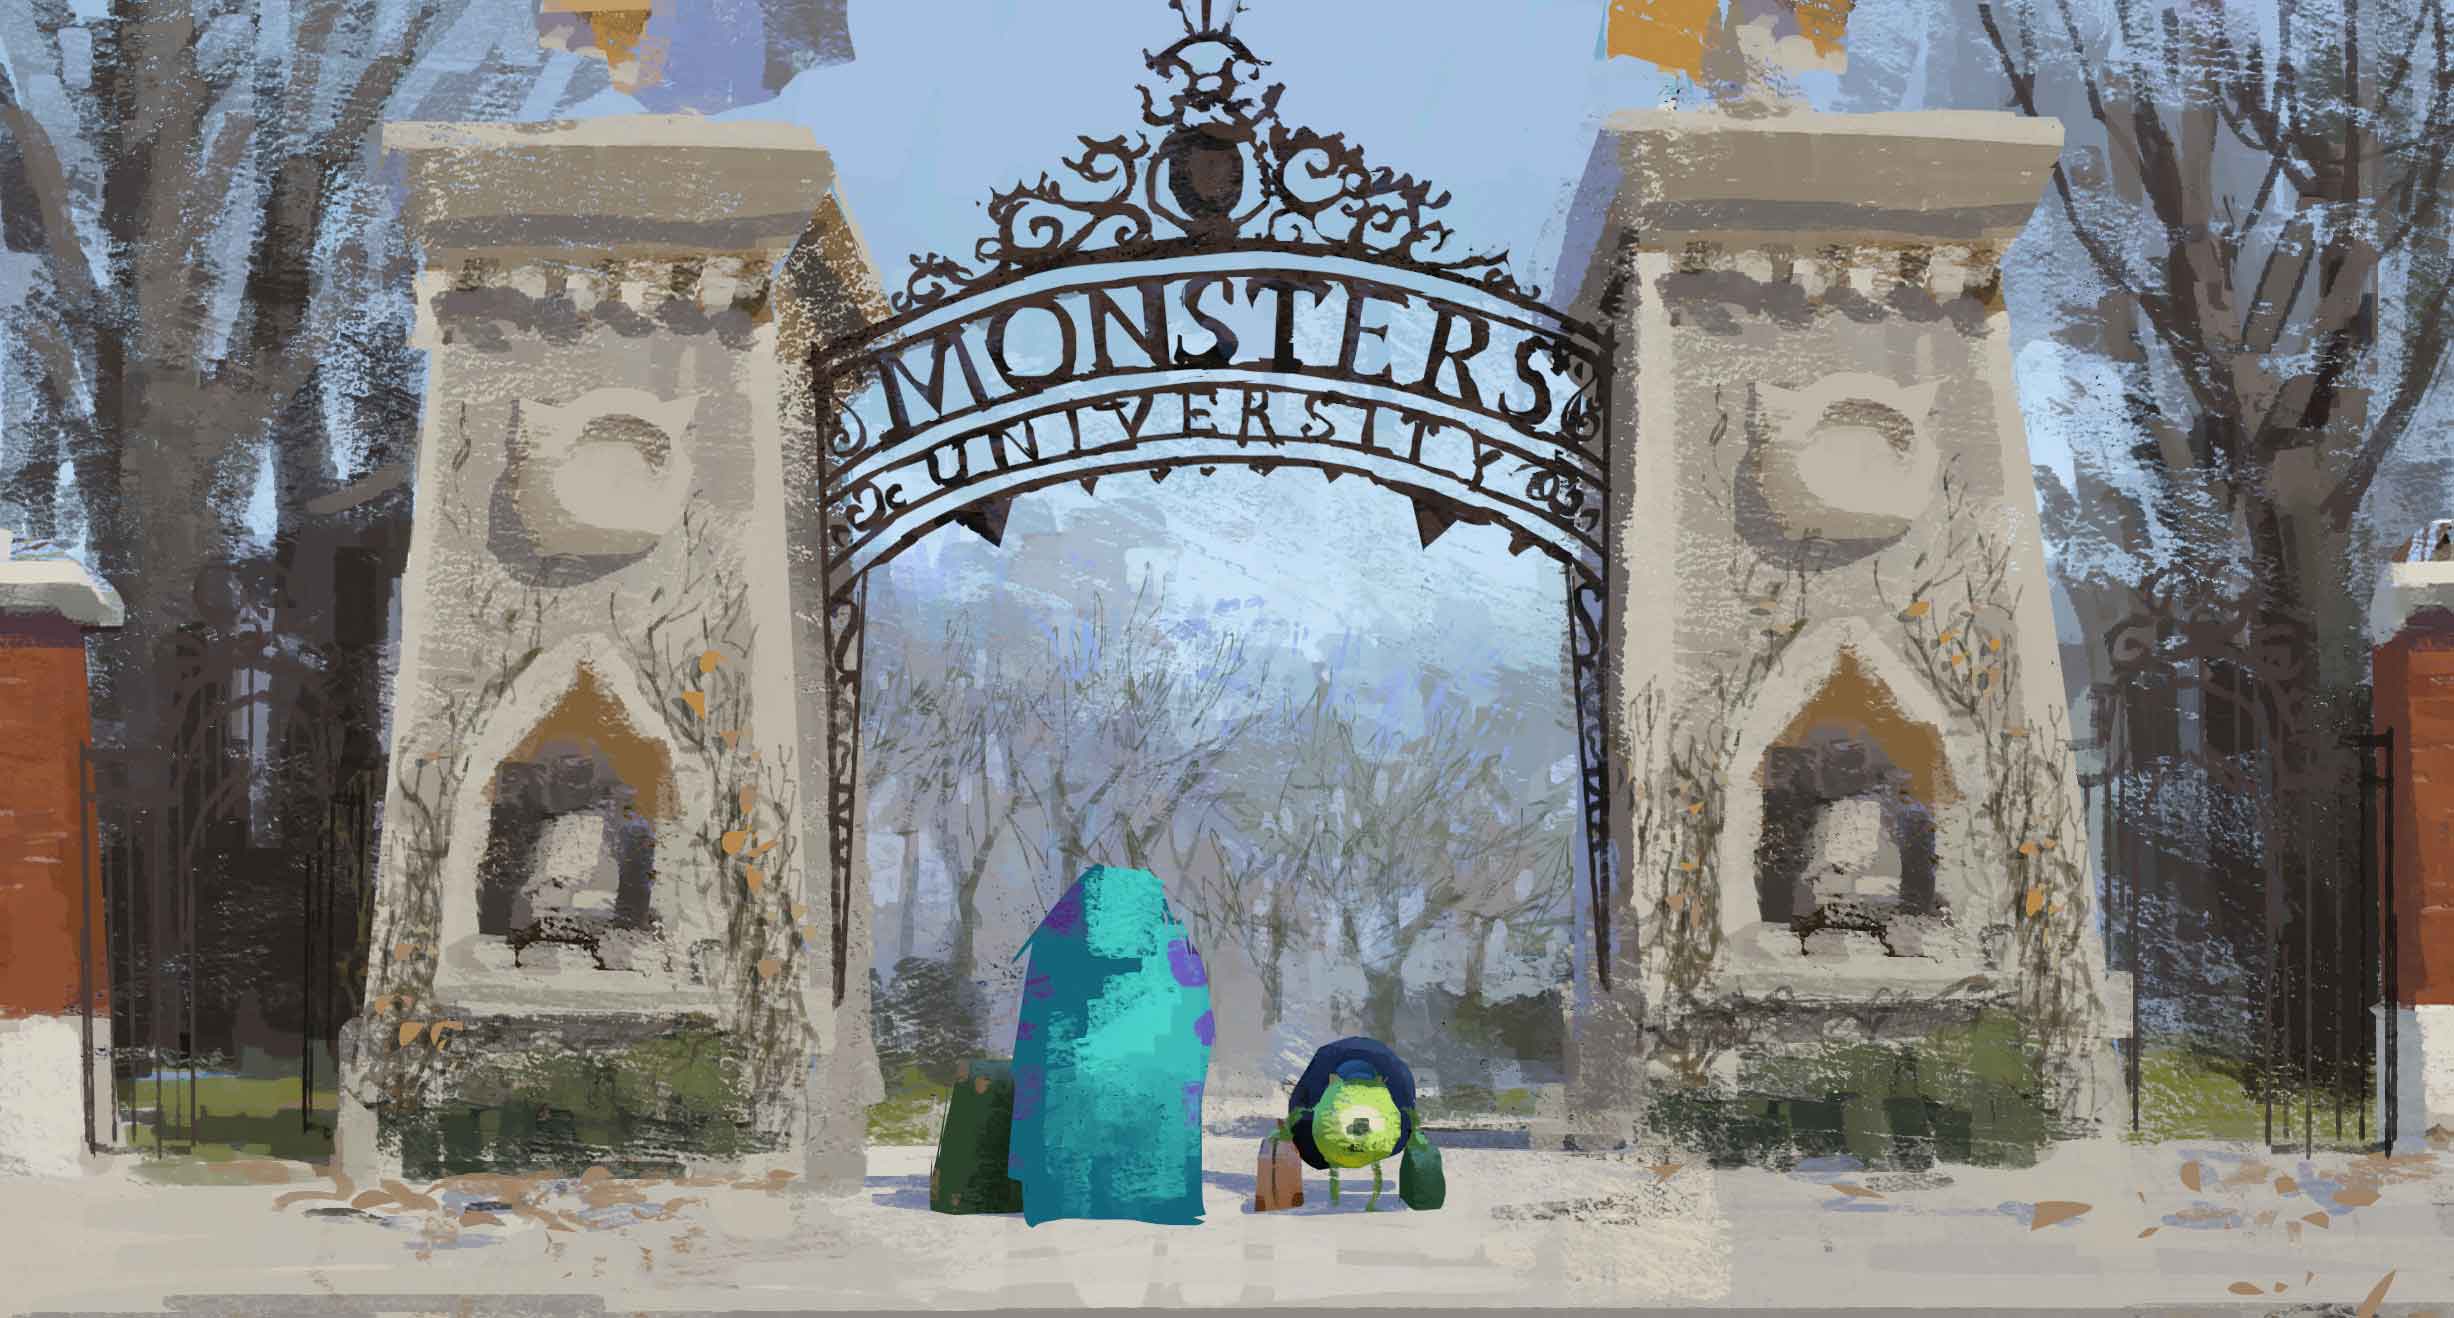 Daisuke "Dice" Tsutsumi, Moment Painting: Expelled, Monsters University, 2013.출처:동대문 디자인 플라자(DDP) 홈페이지(http://www.ddp.or.kr)